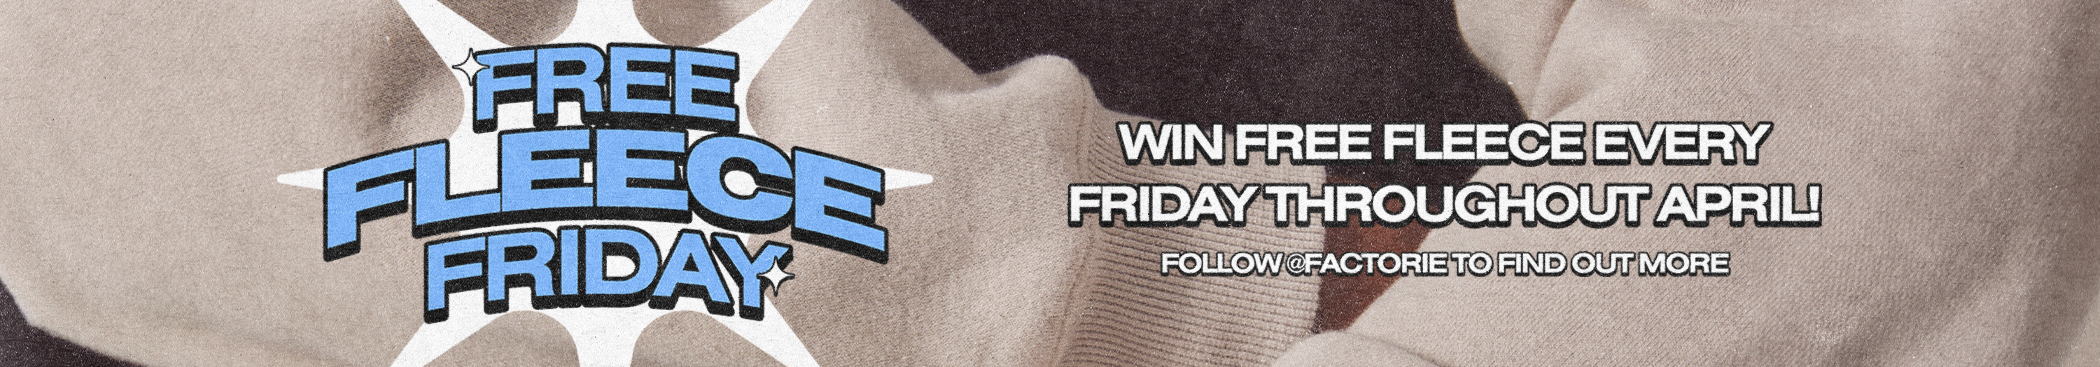 Win Free Fleece Every Friday Throughout April!